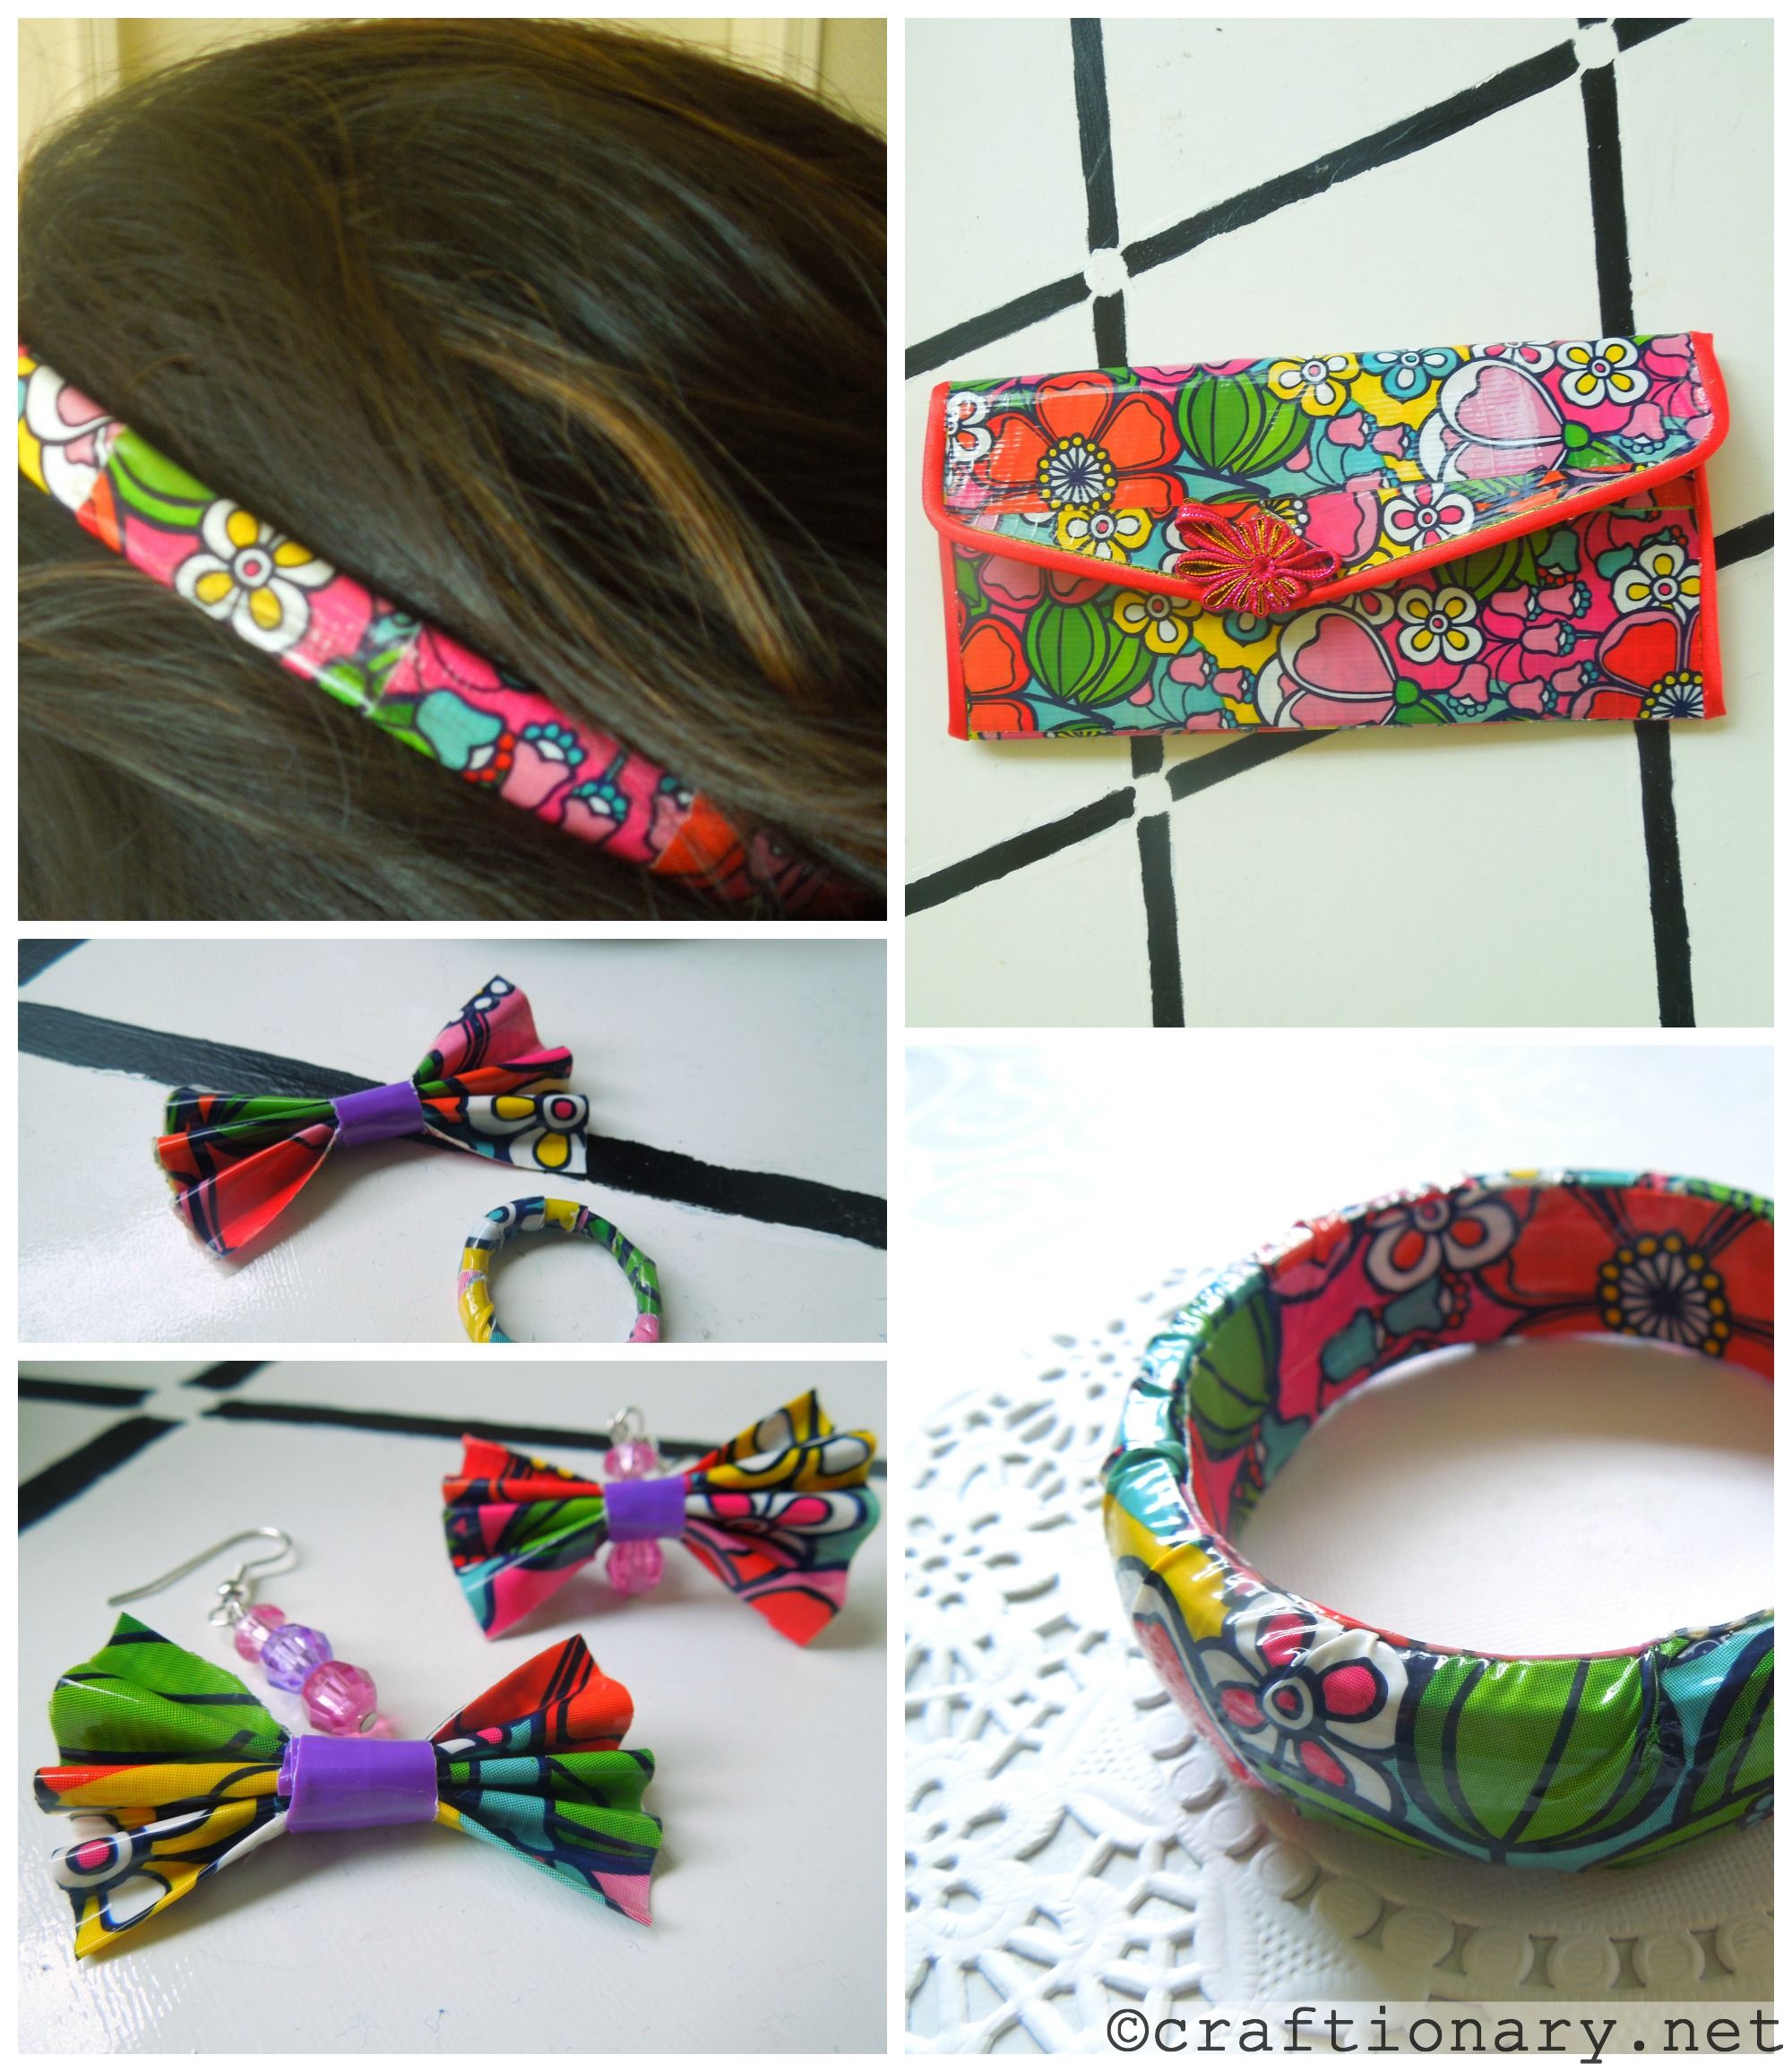 duct tape crafts 5